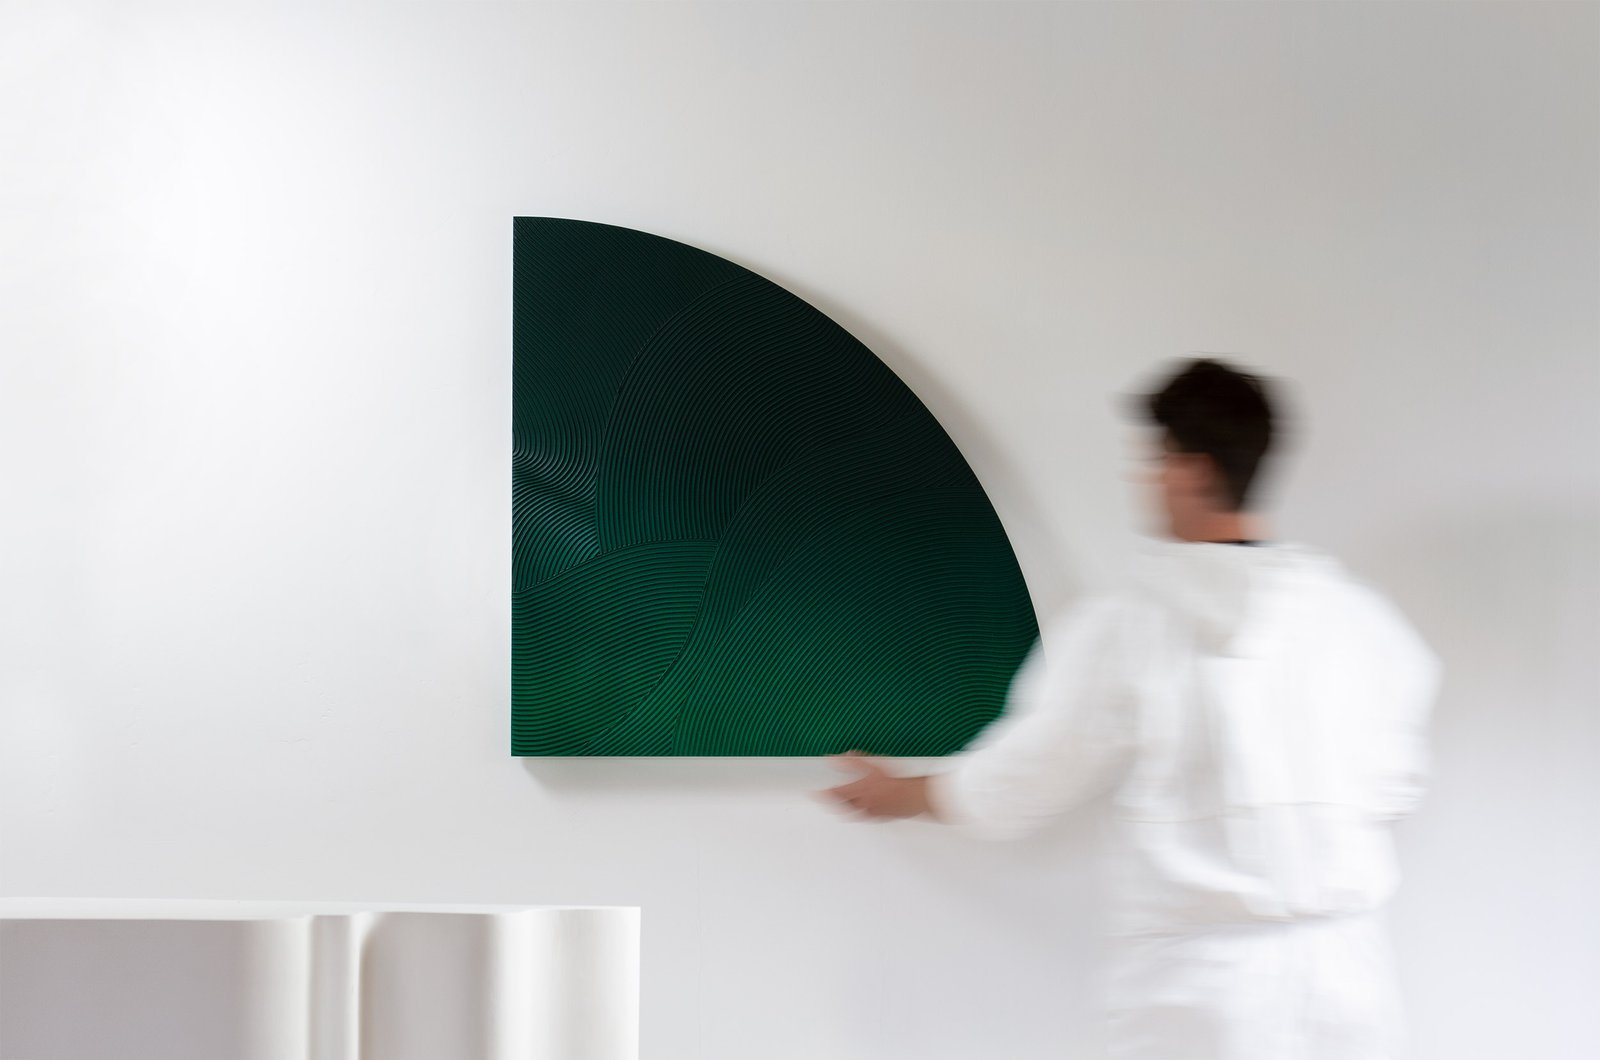 Image of Quarter Circle Relief · Green